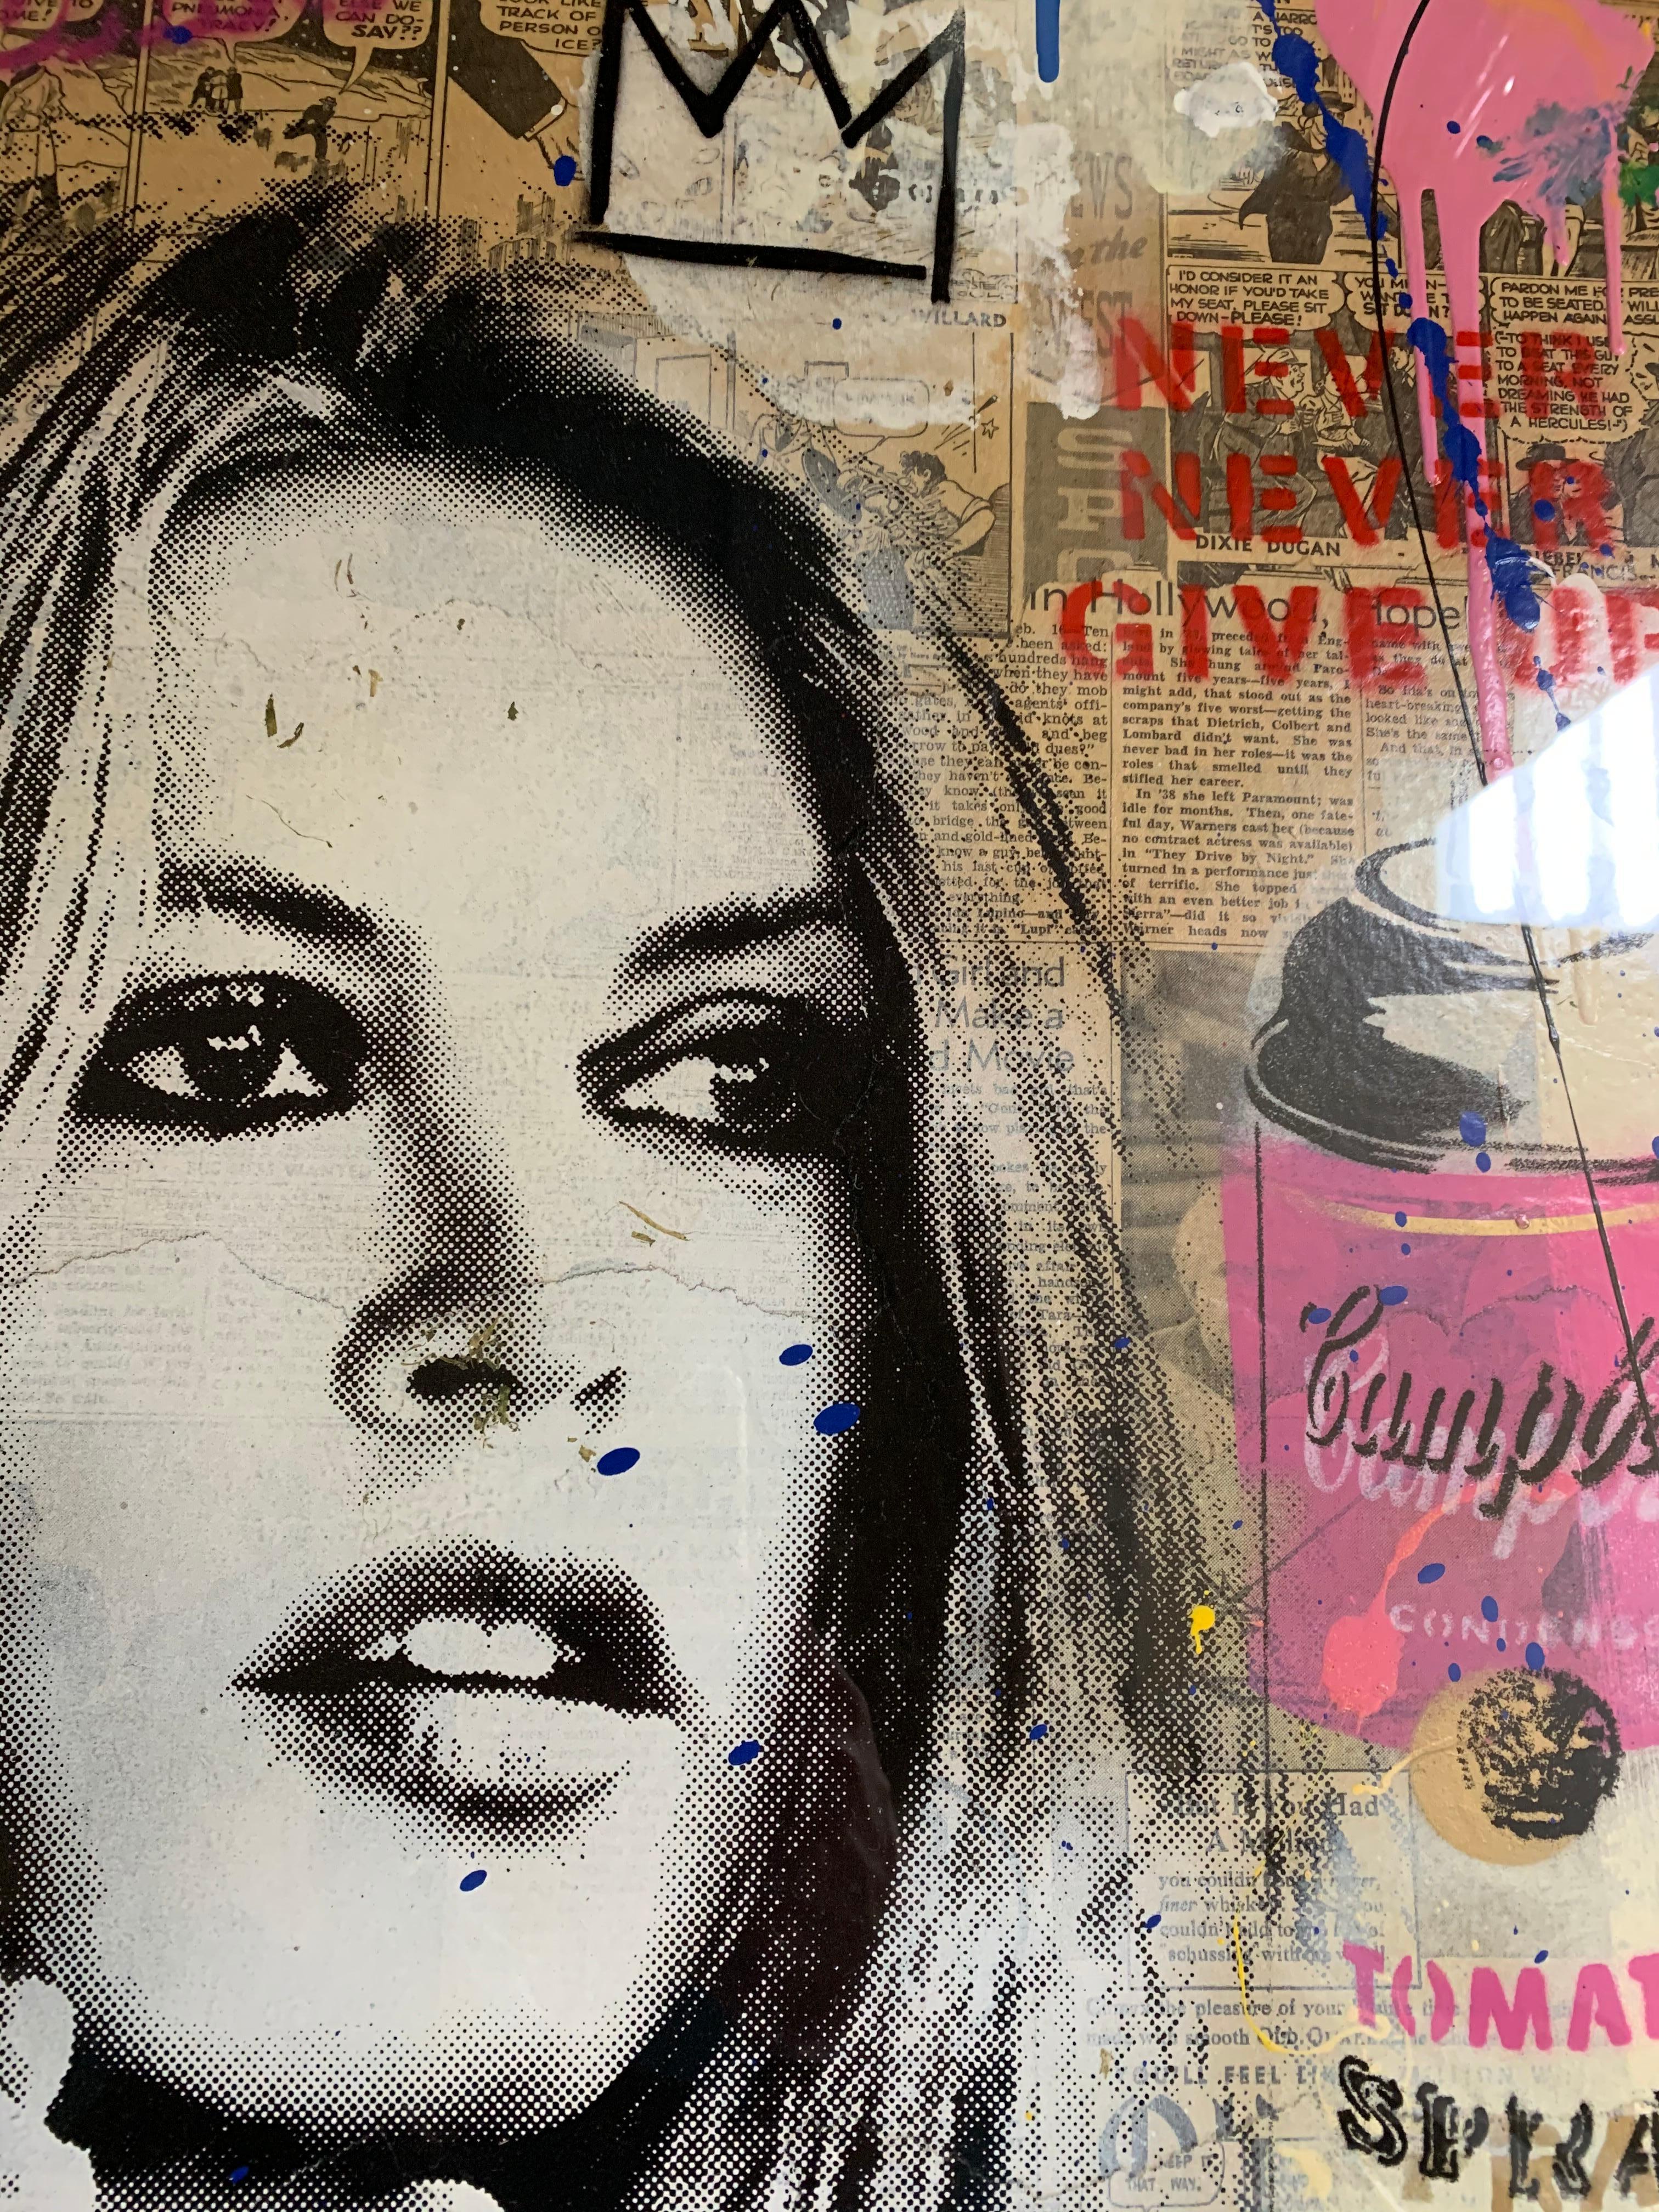 Framed One Of A Kind Mixed Media On Paper By Mr. Brainwash  Paper Size 30